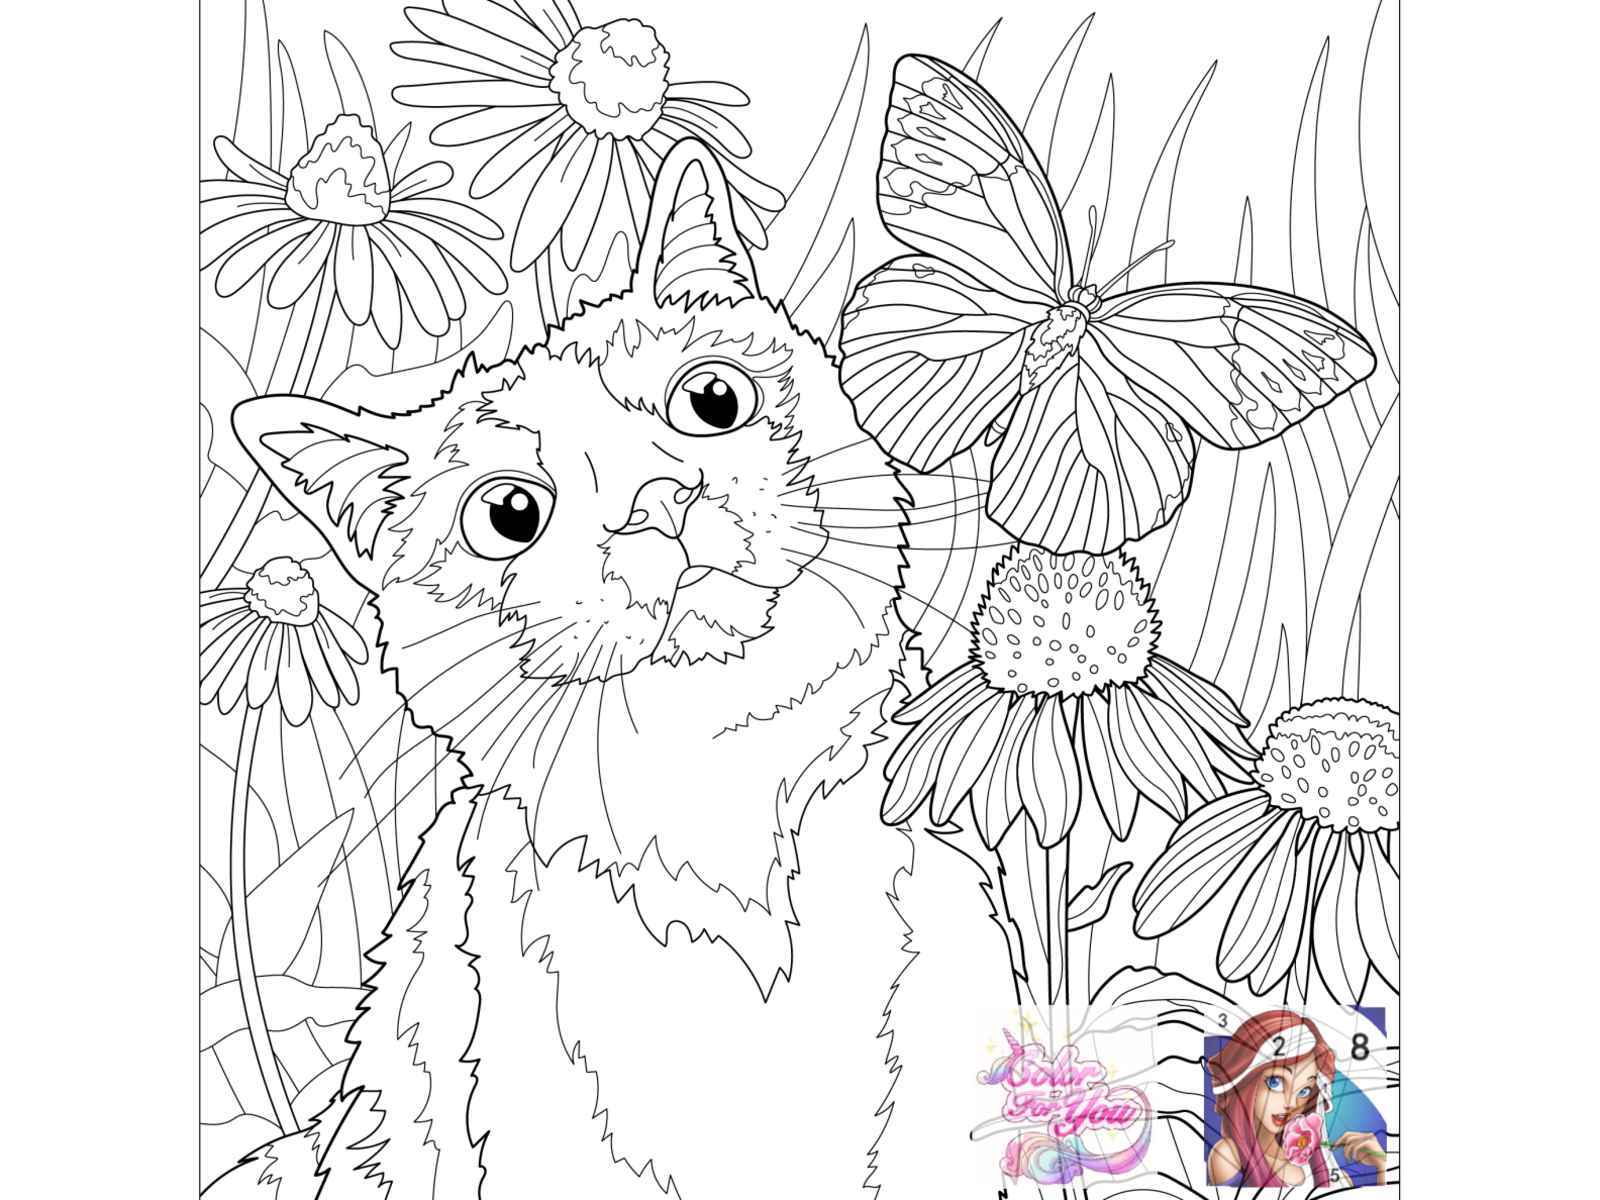 Spiral Coloring Page for Adults Vol.17 Graphic by Fleur de Tango